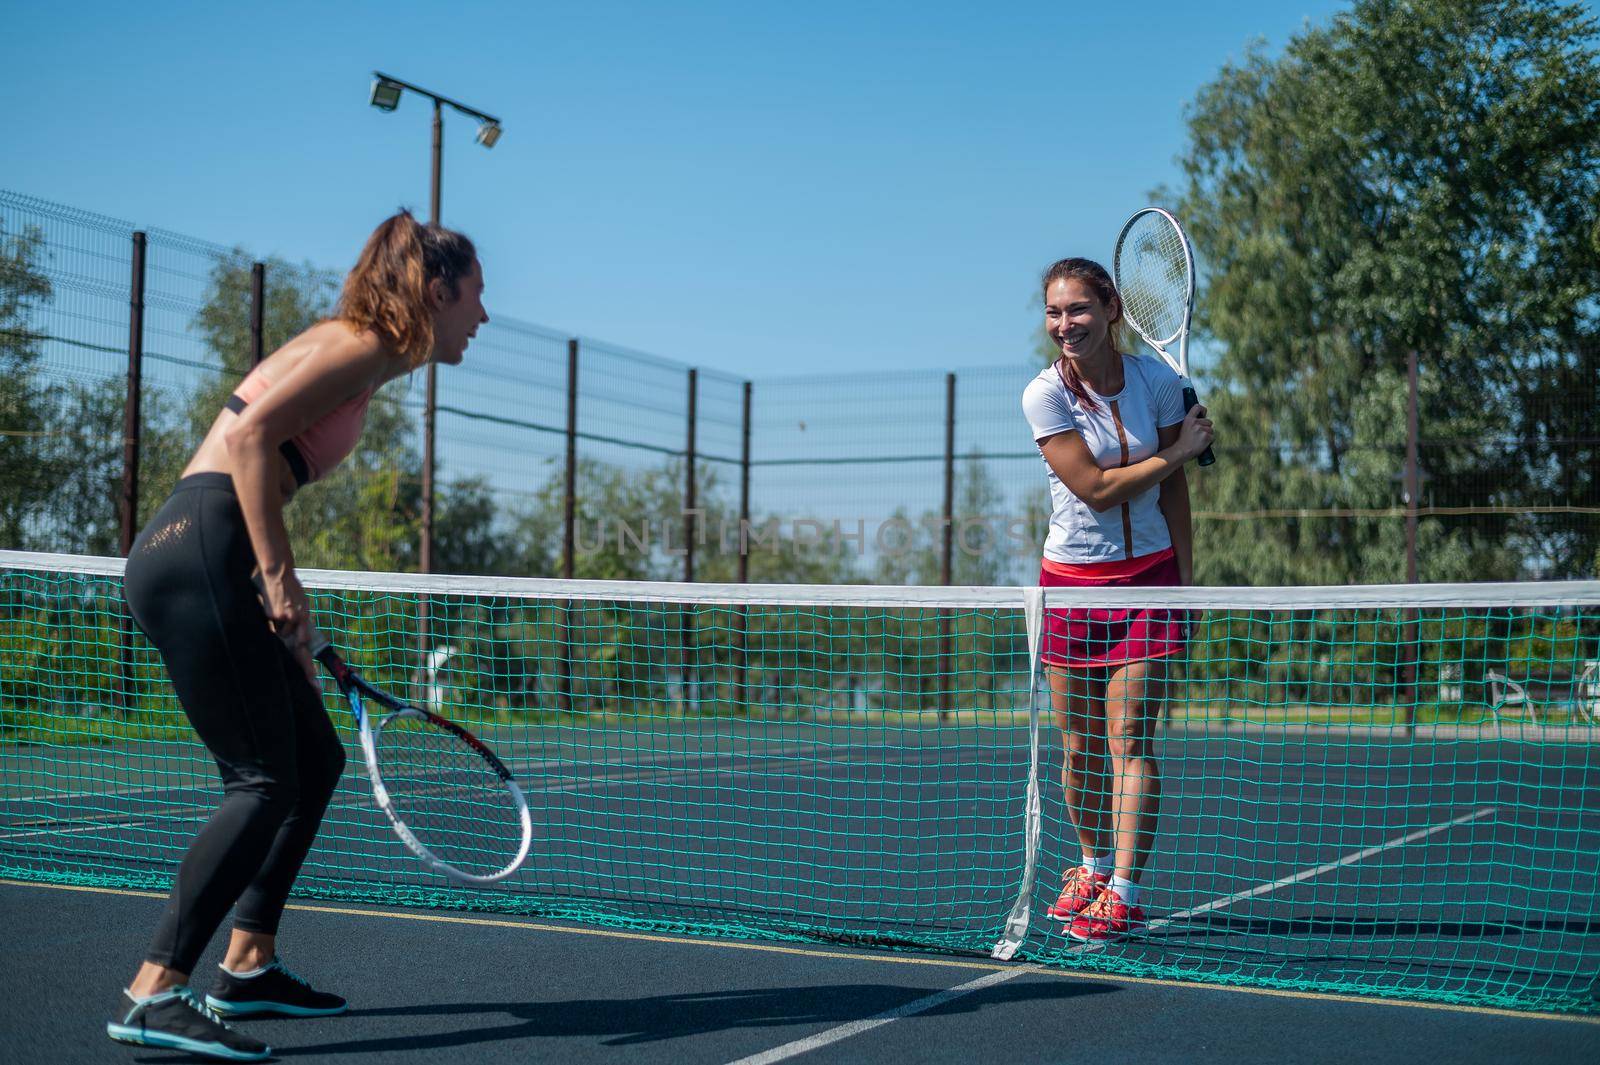 Two athletic young women play tennis on an outdoor court on a hot summer day. by mrwed54